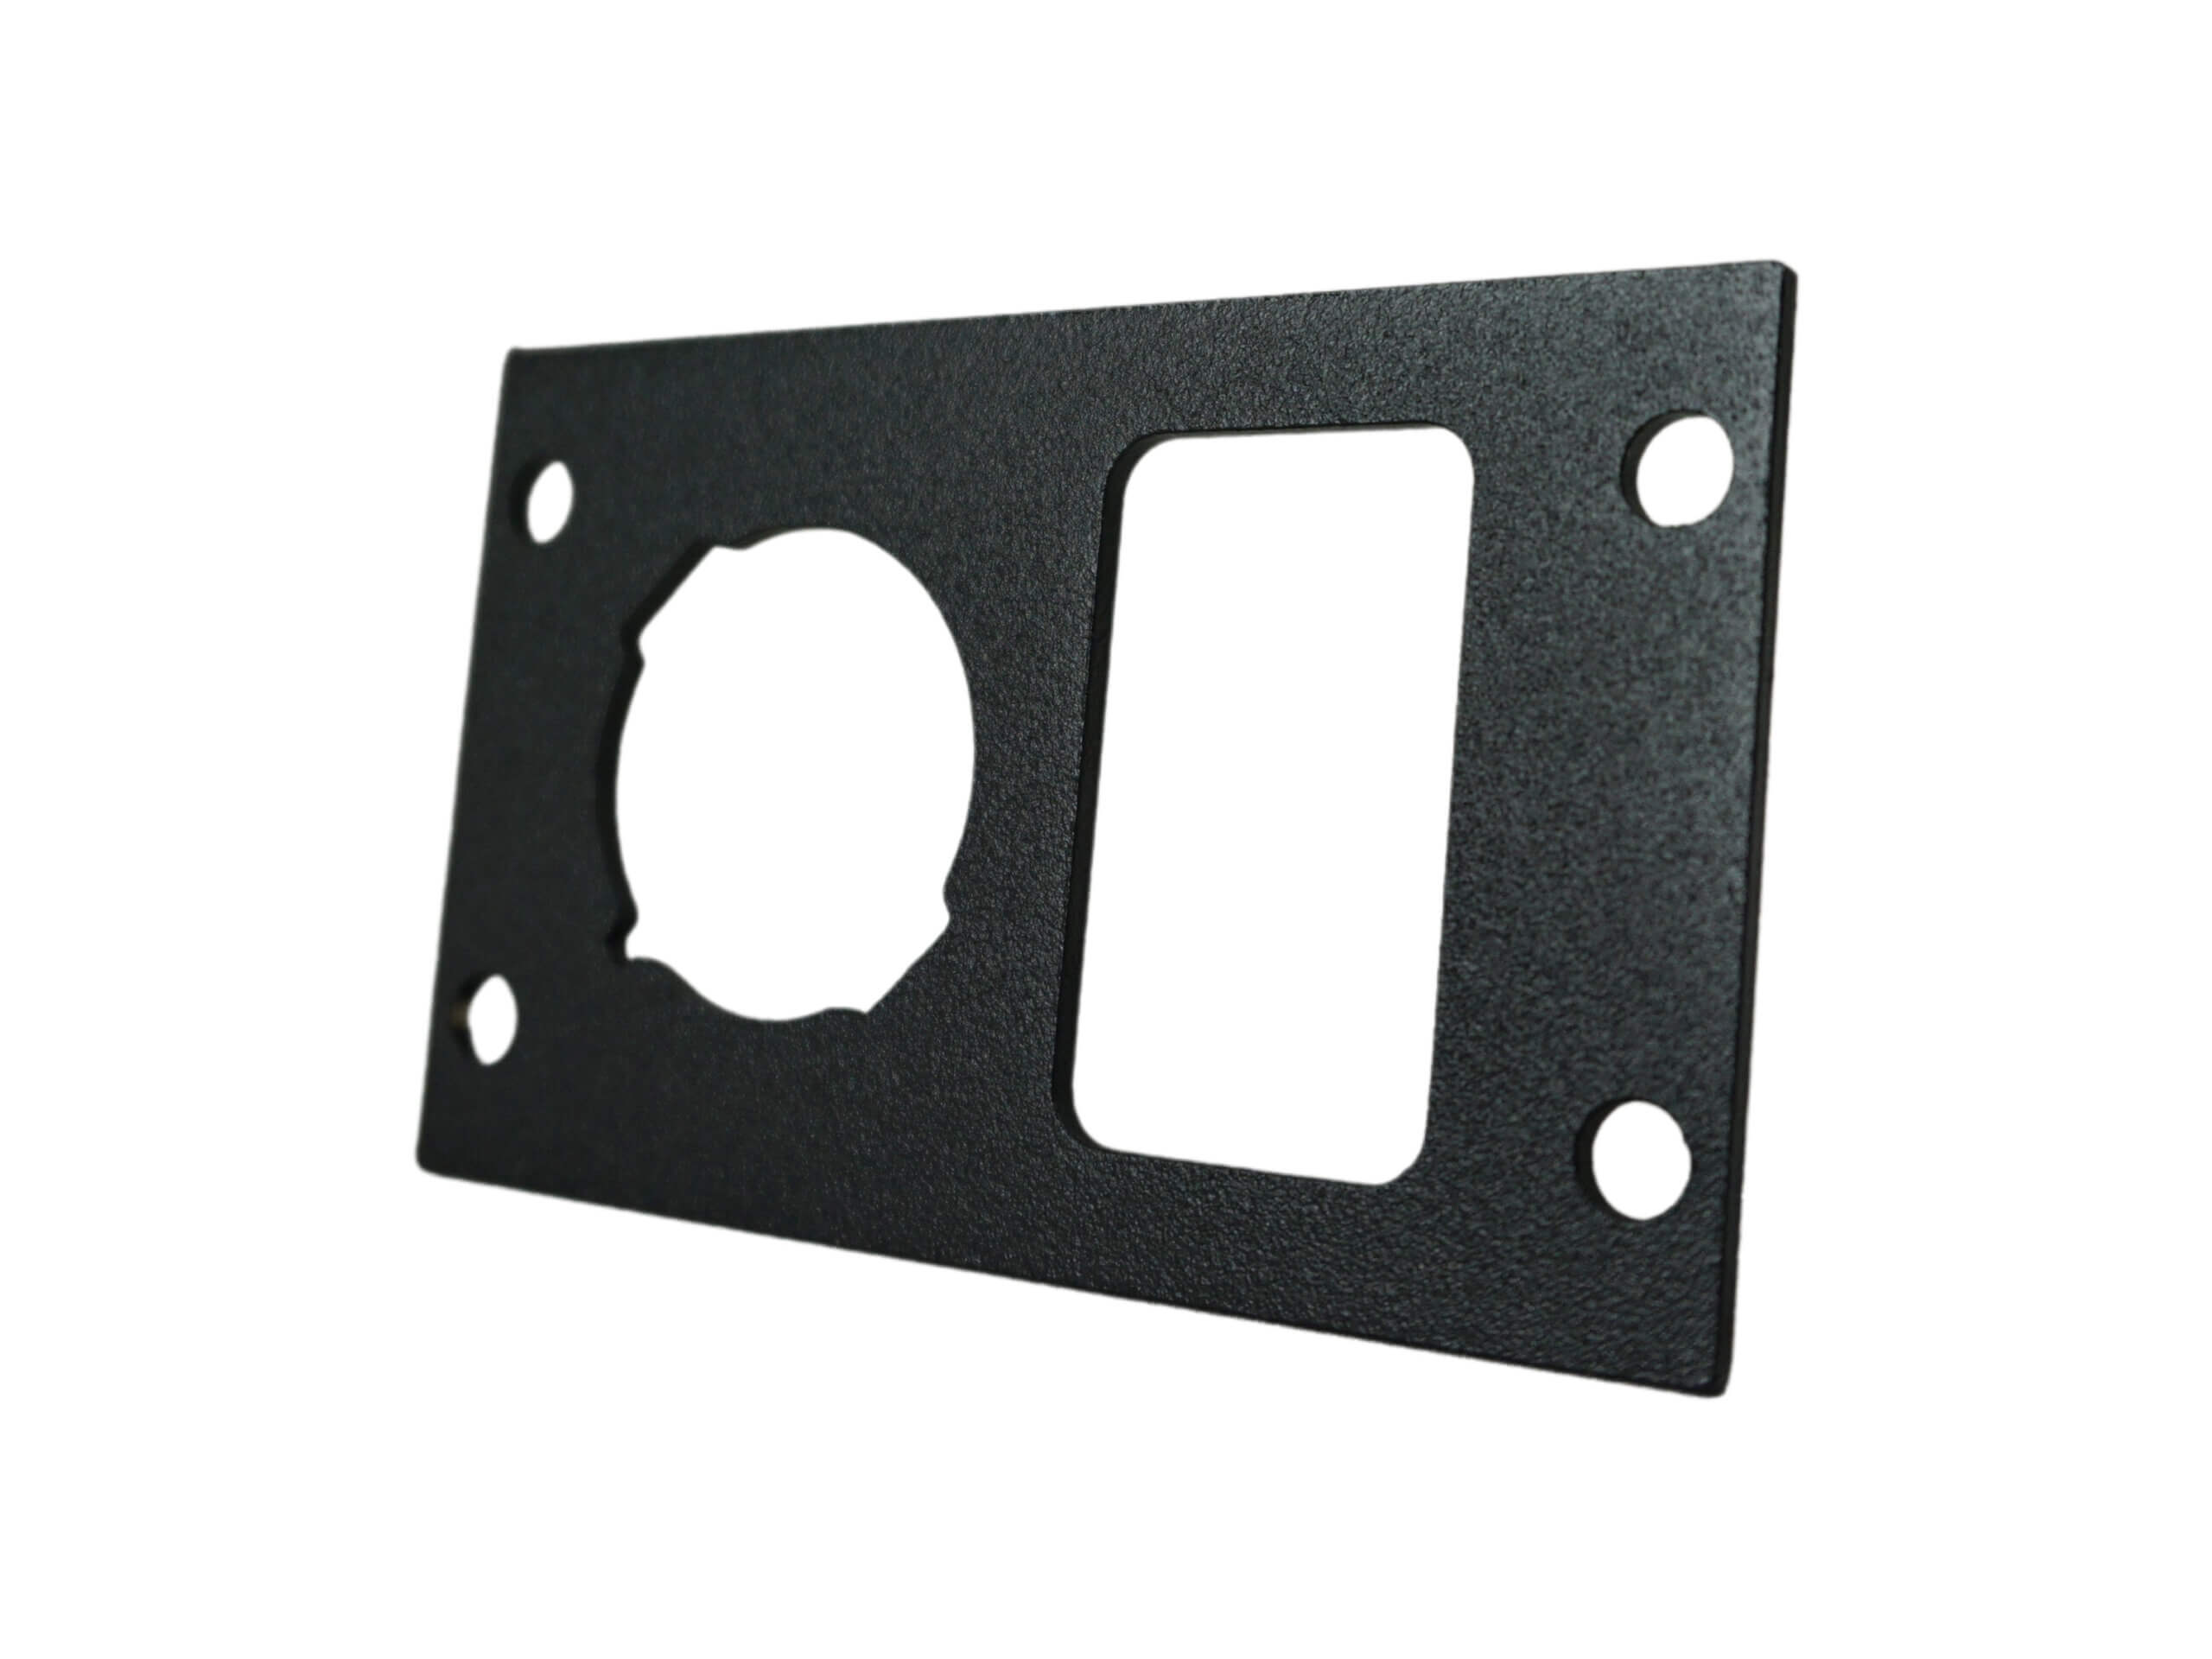 Equipment Bracket for Wide VSW Consoles, Fits Single Lighter Plug and Single USB/Switch